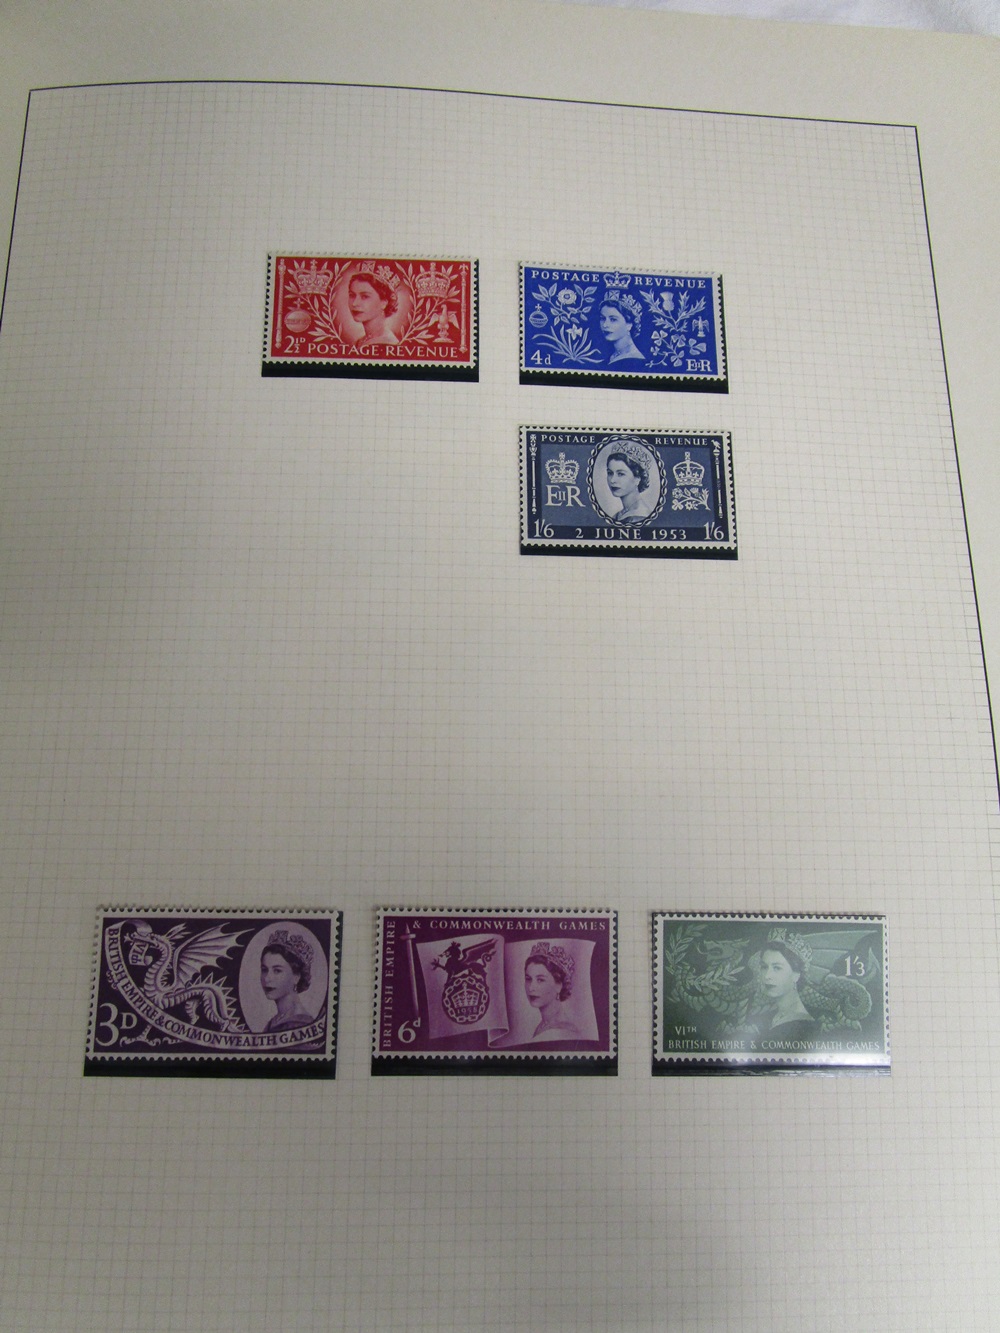 Stamps - Well filled GB album - QV onwards - Image 9 of 14